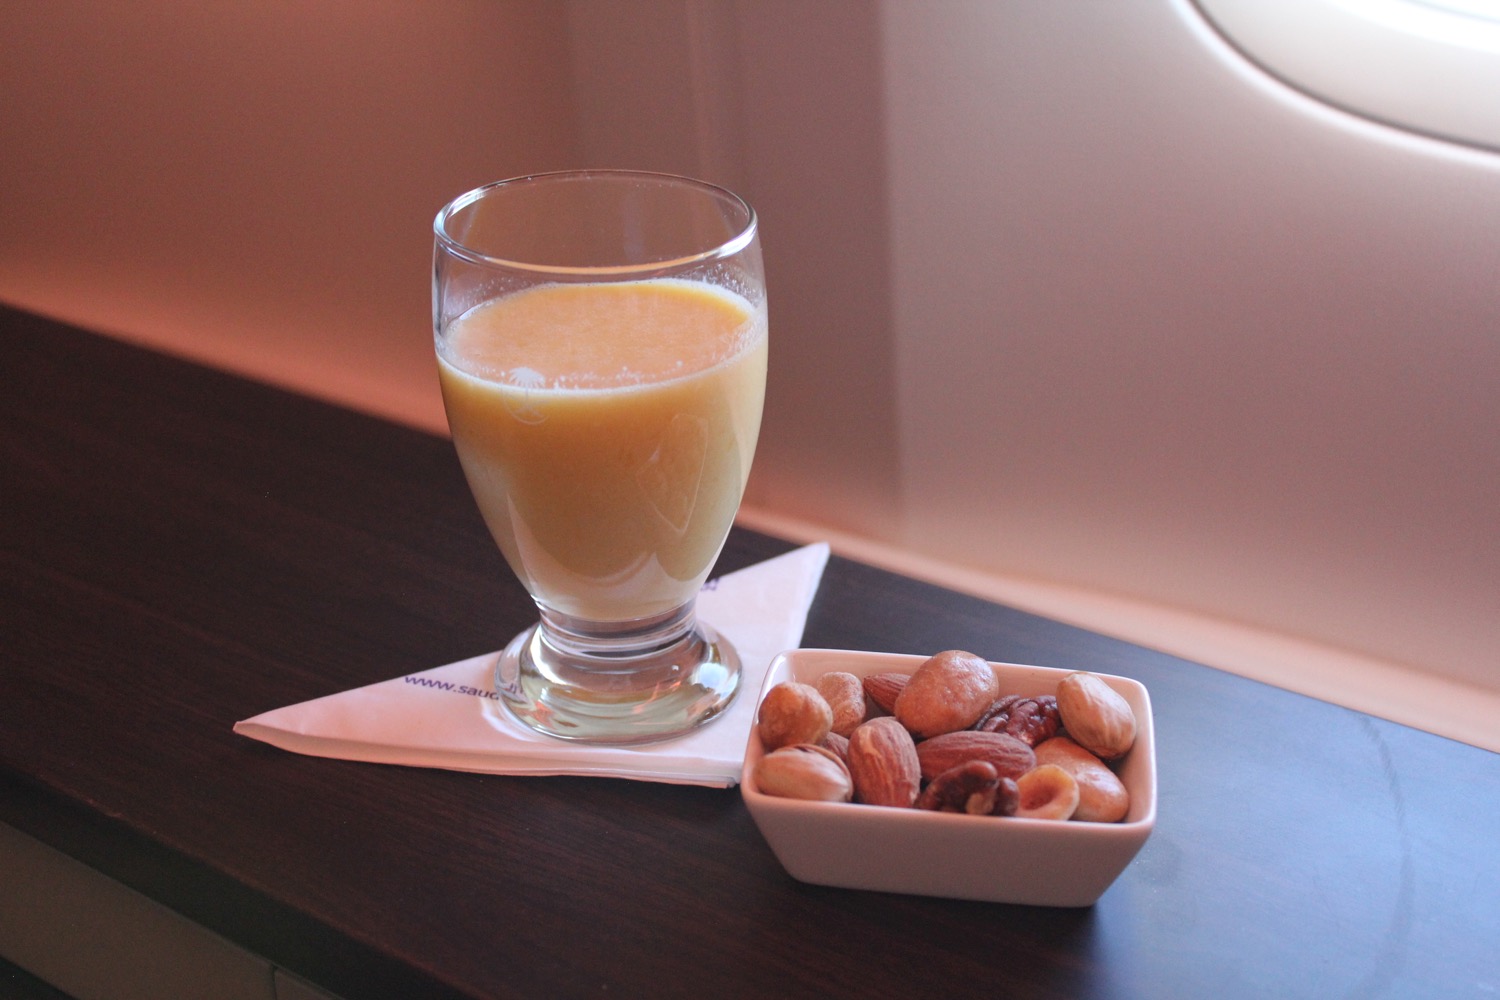 a glass of orange juice and a bowl of nuts